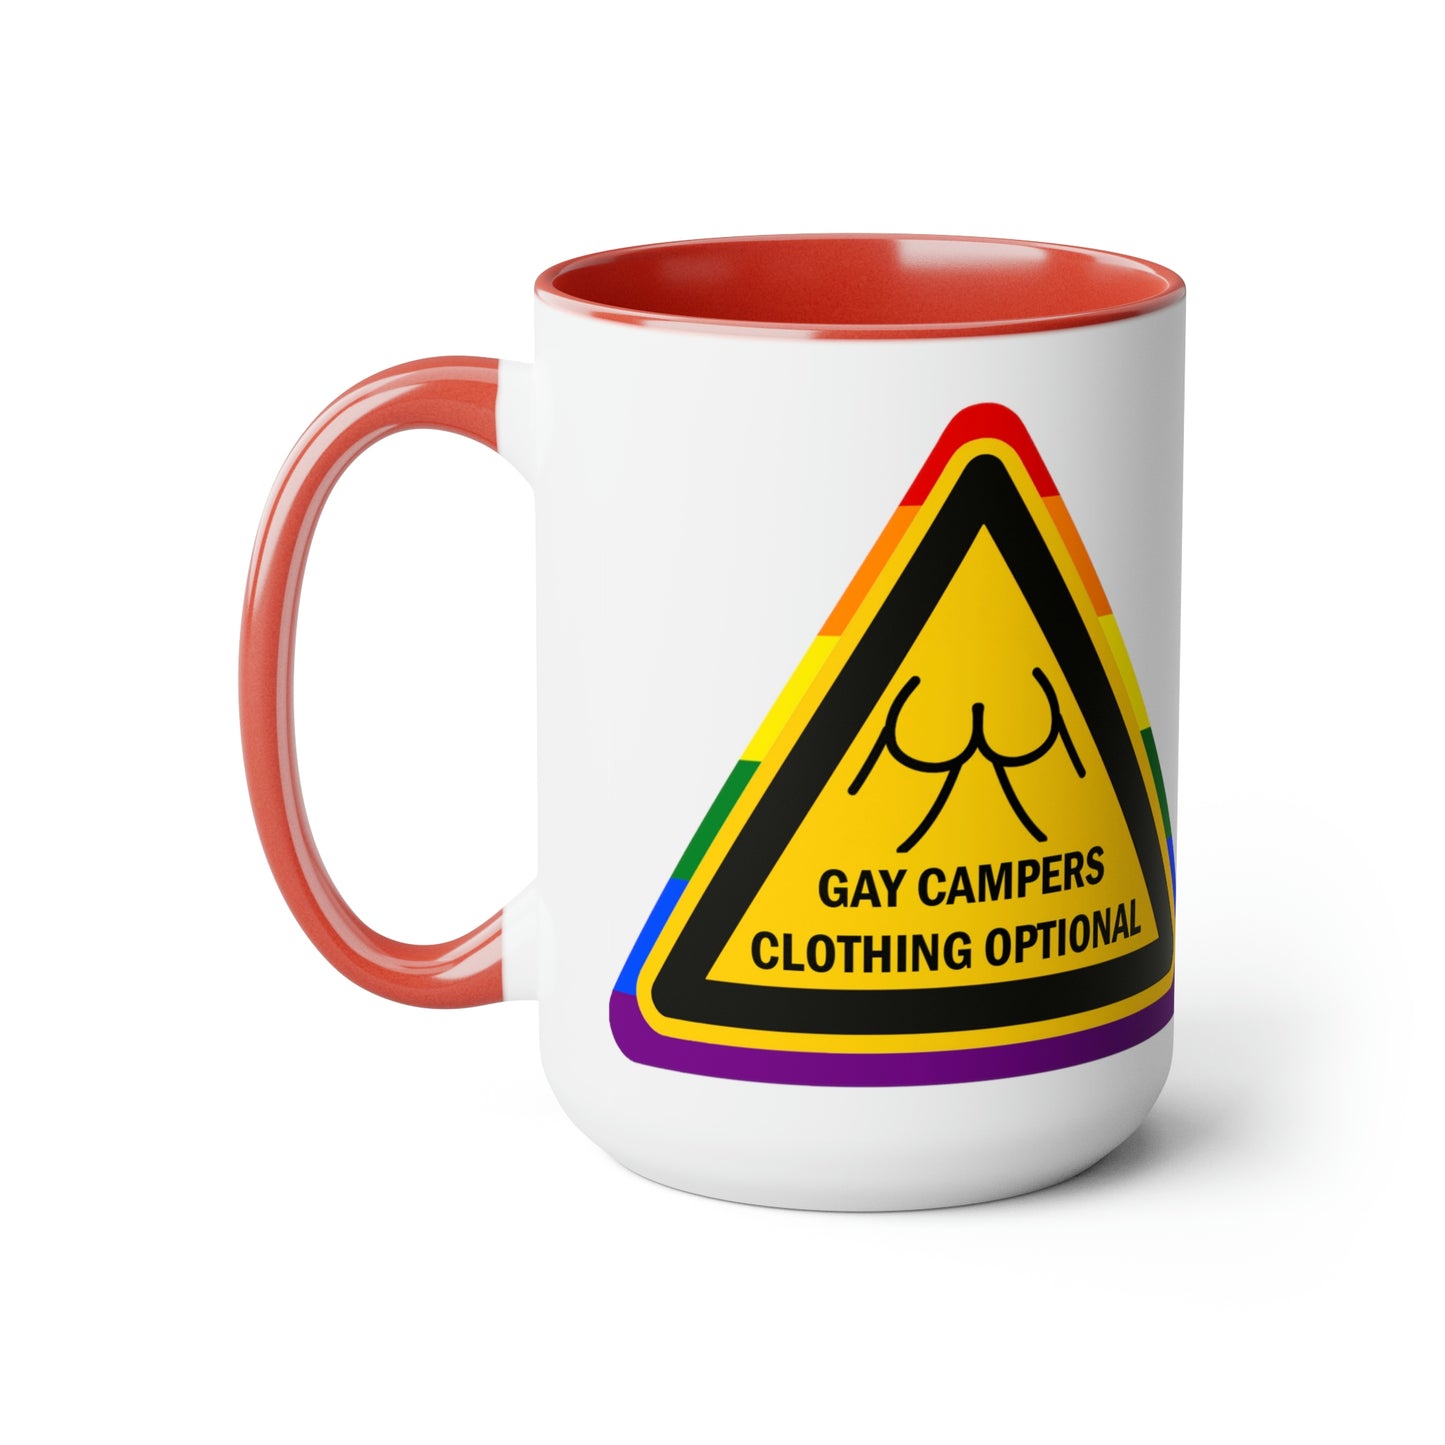 Gay Campers - Clothing Optional Warning Sign Two-Tone Coffee Mugs, 15oz